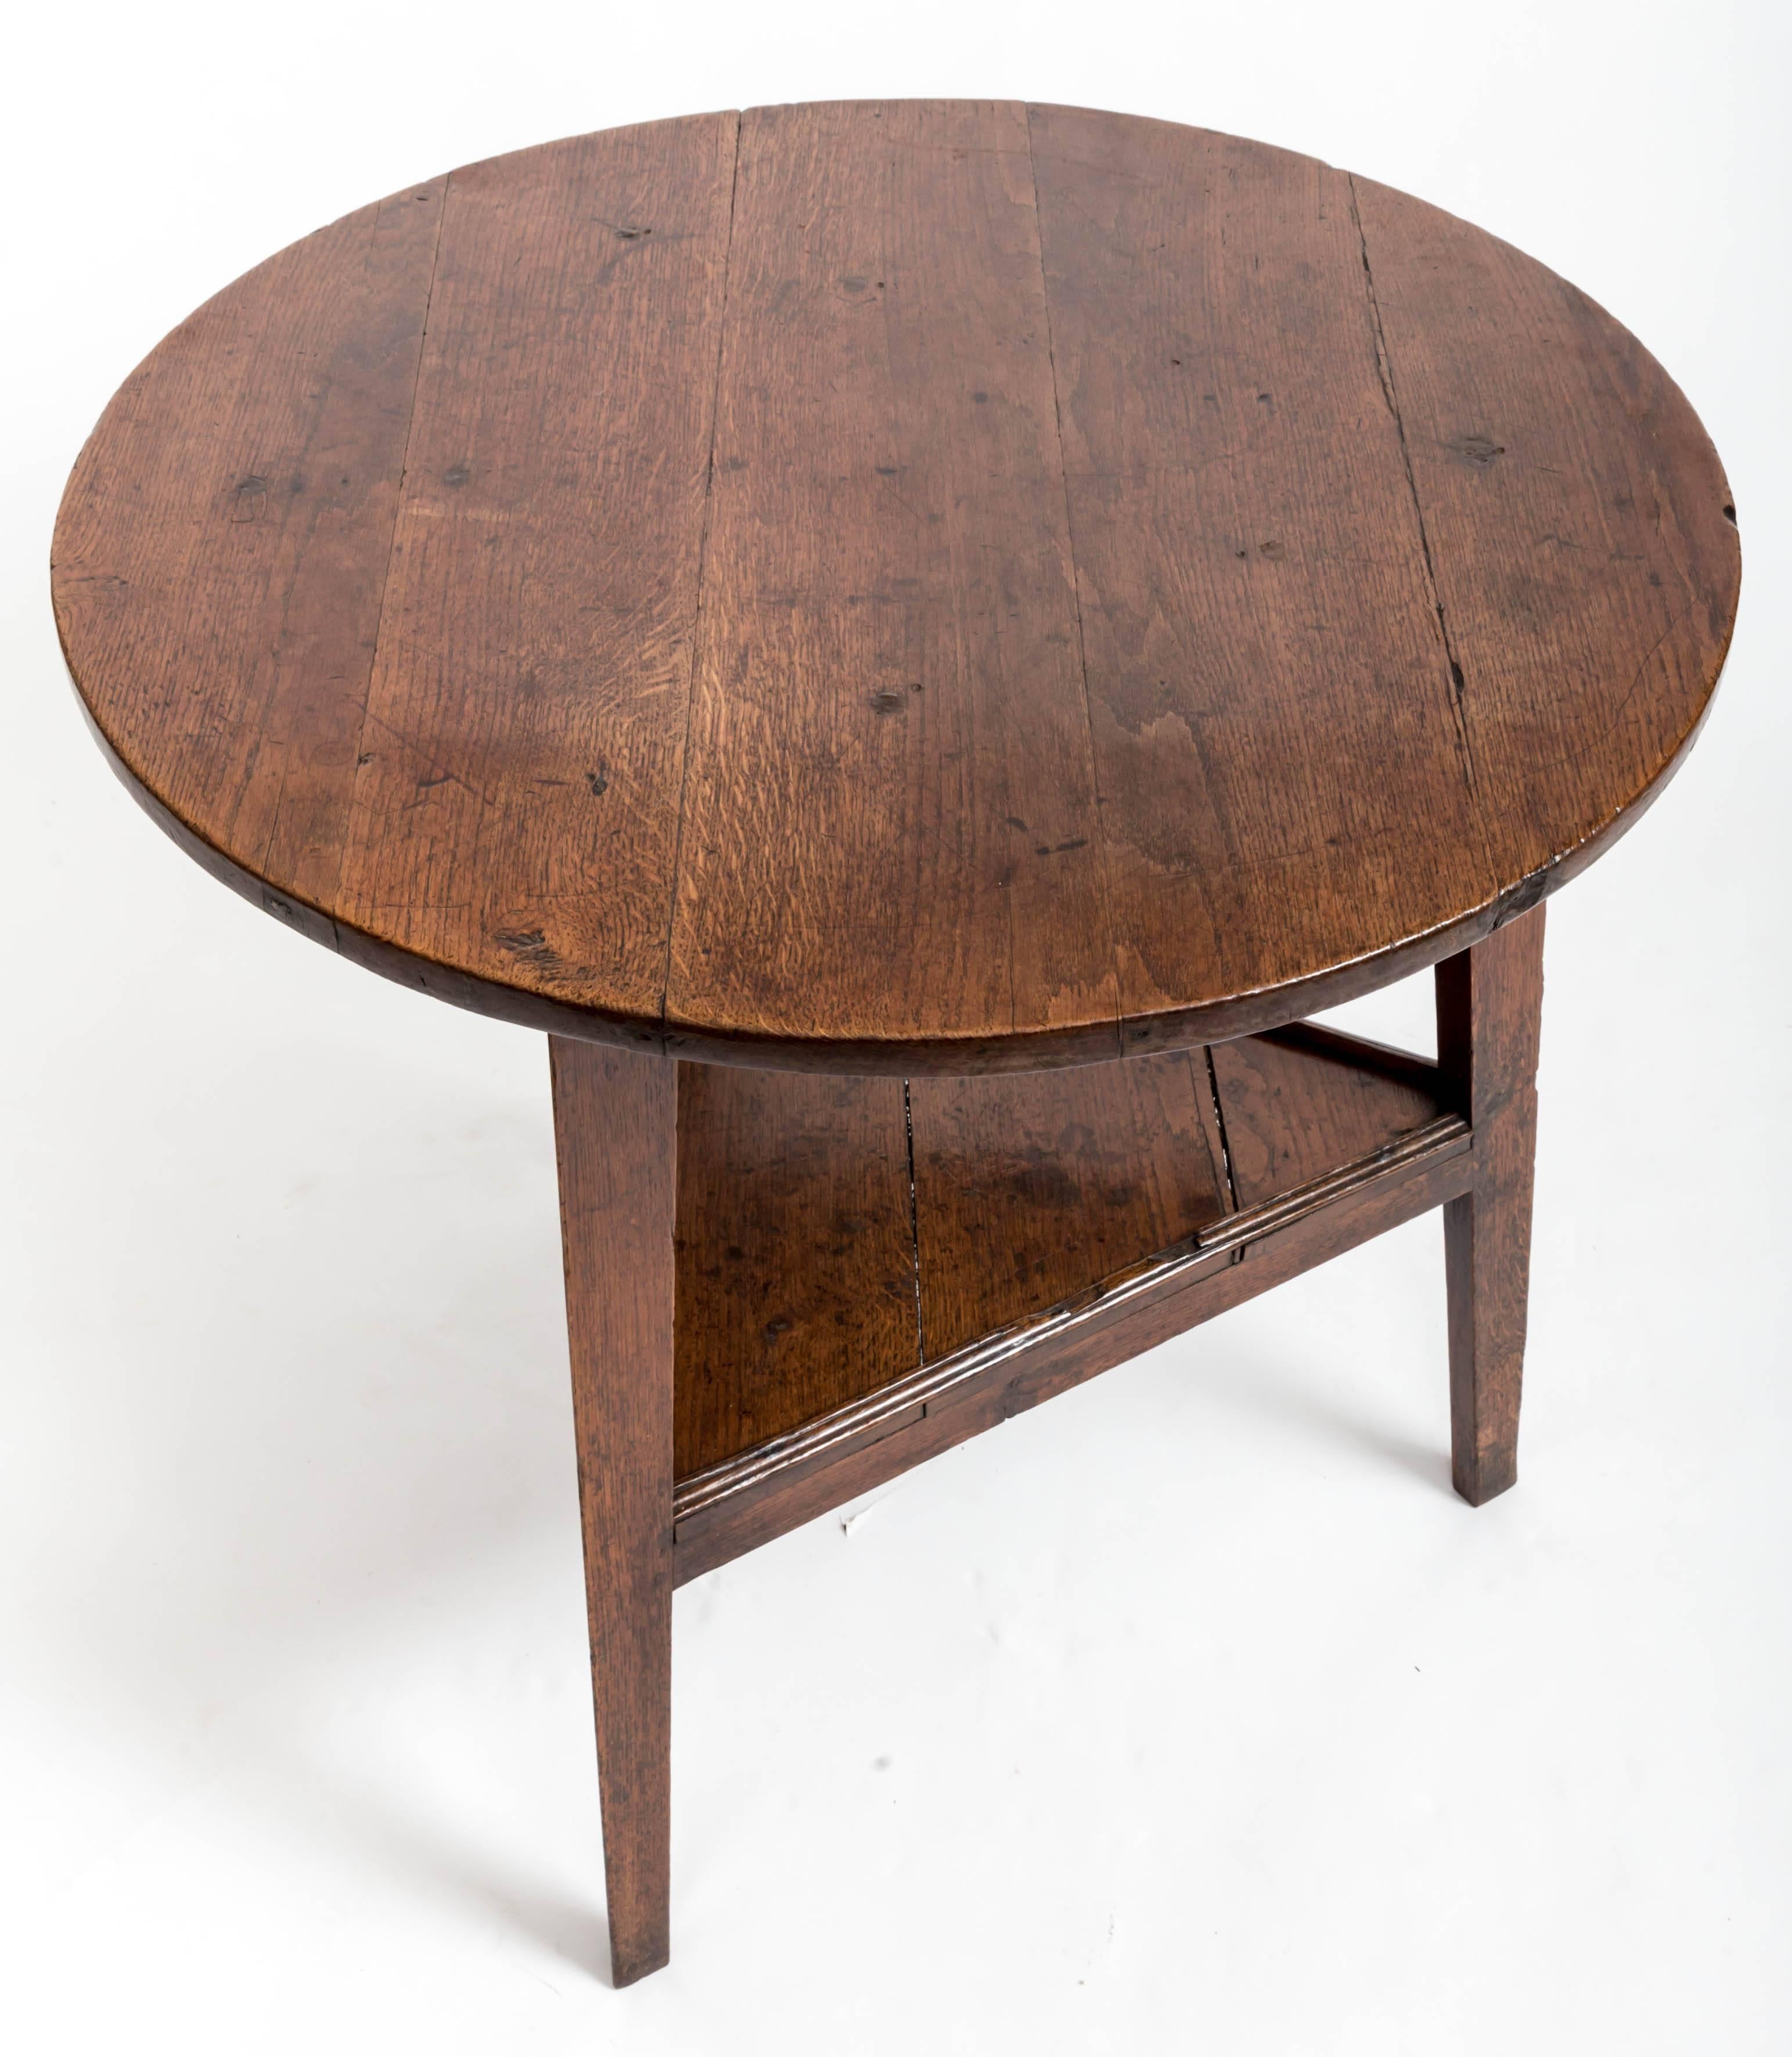 Classic cricket table with three tapered legs, second pot shelf.